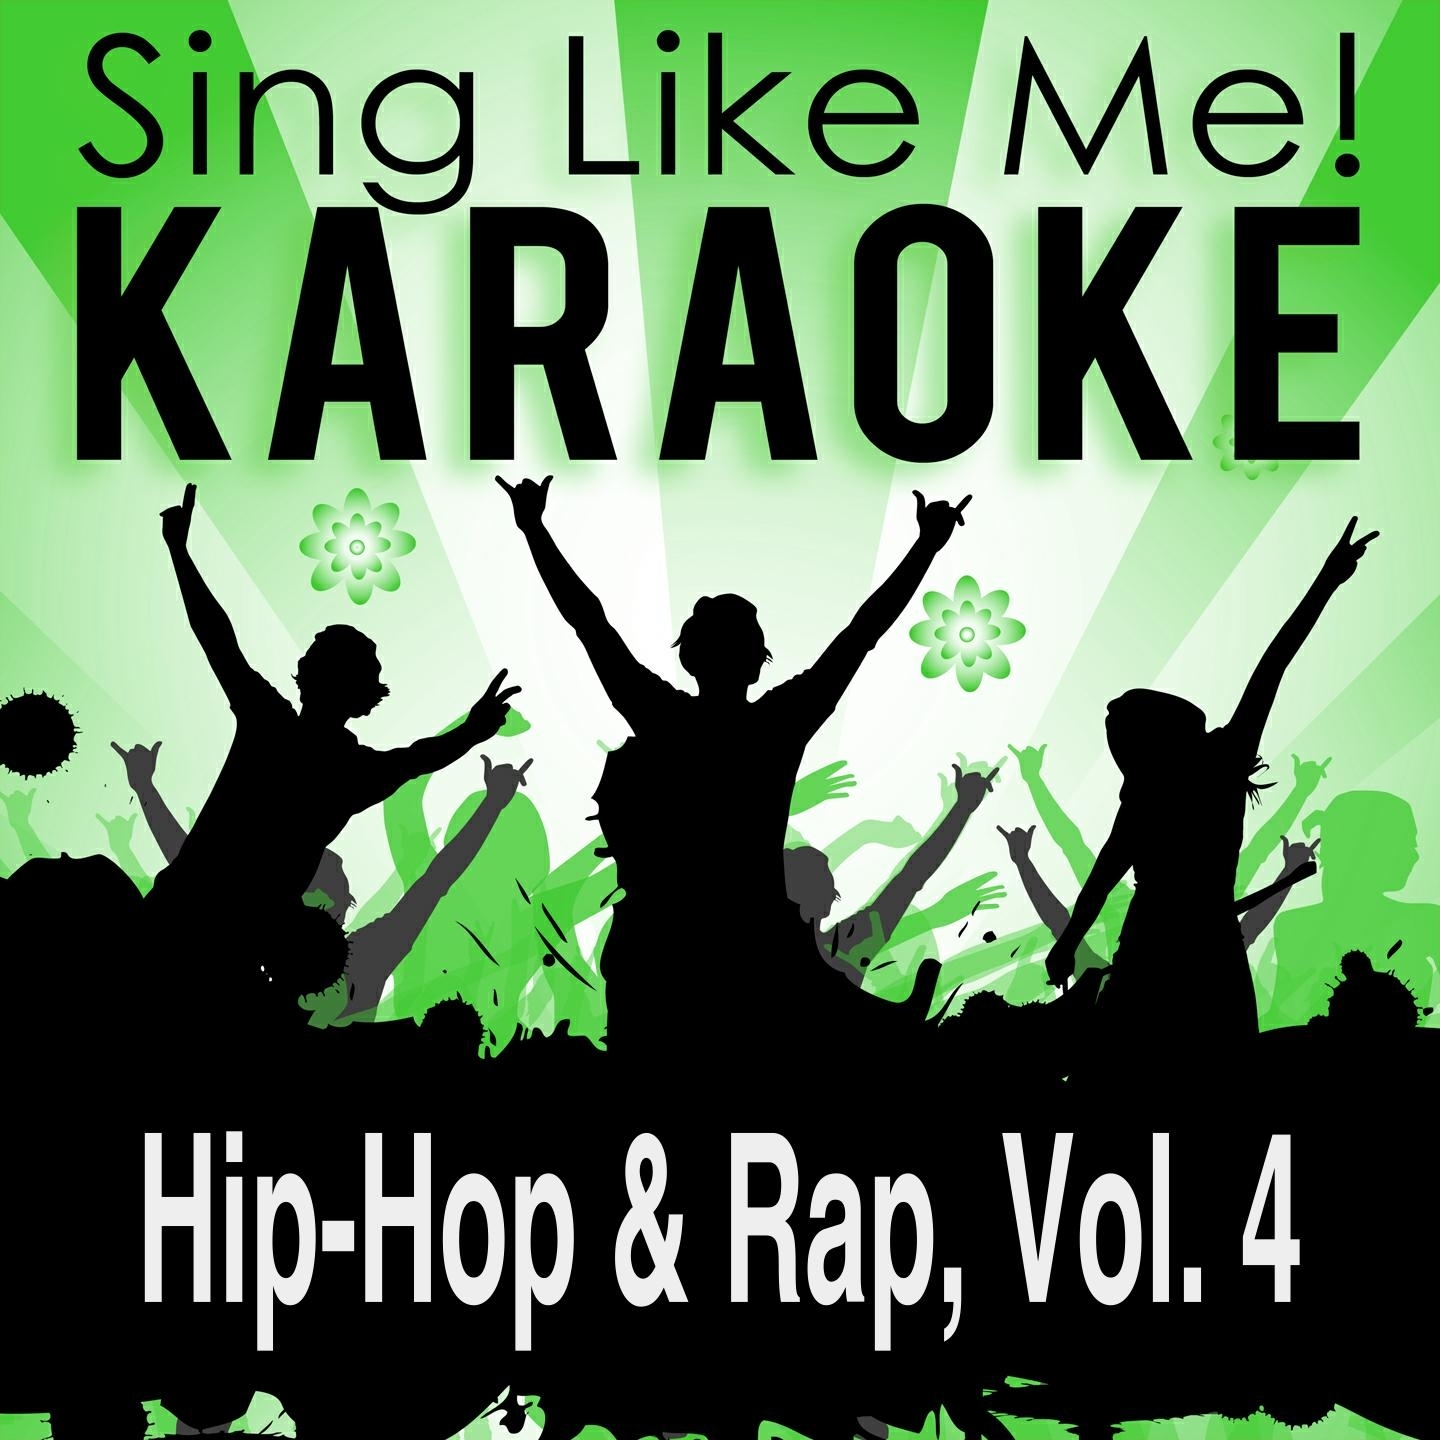 Fight for Your Right (Karaoke Version) (Originally Performed By N.Y.C.C.)